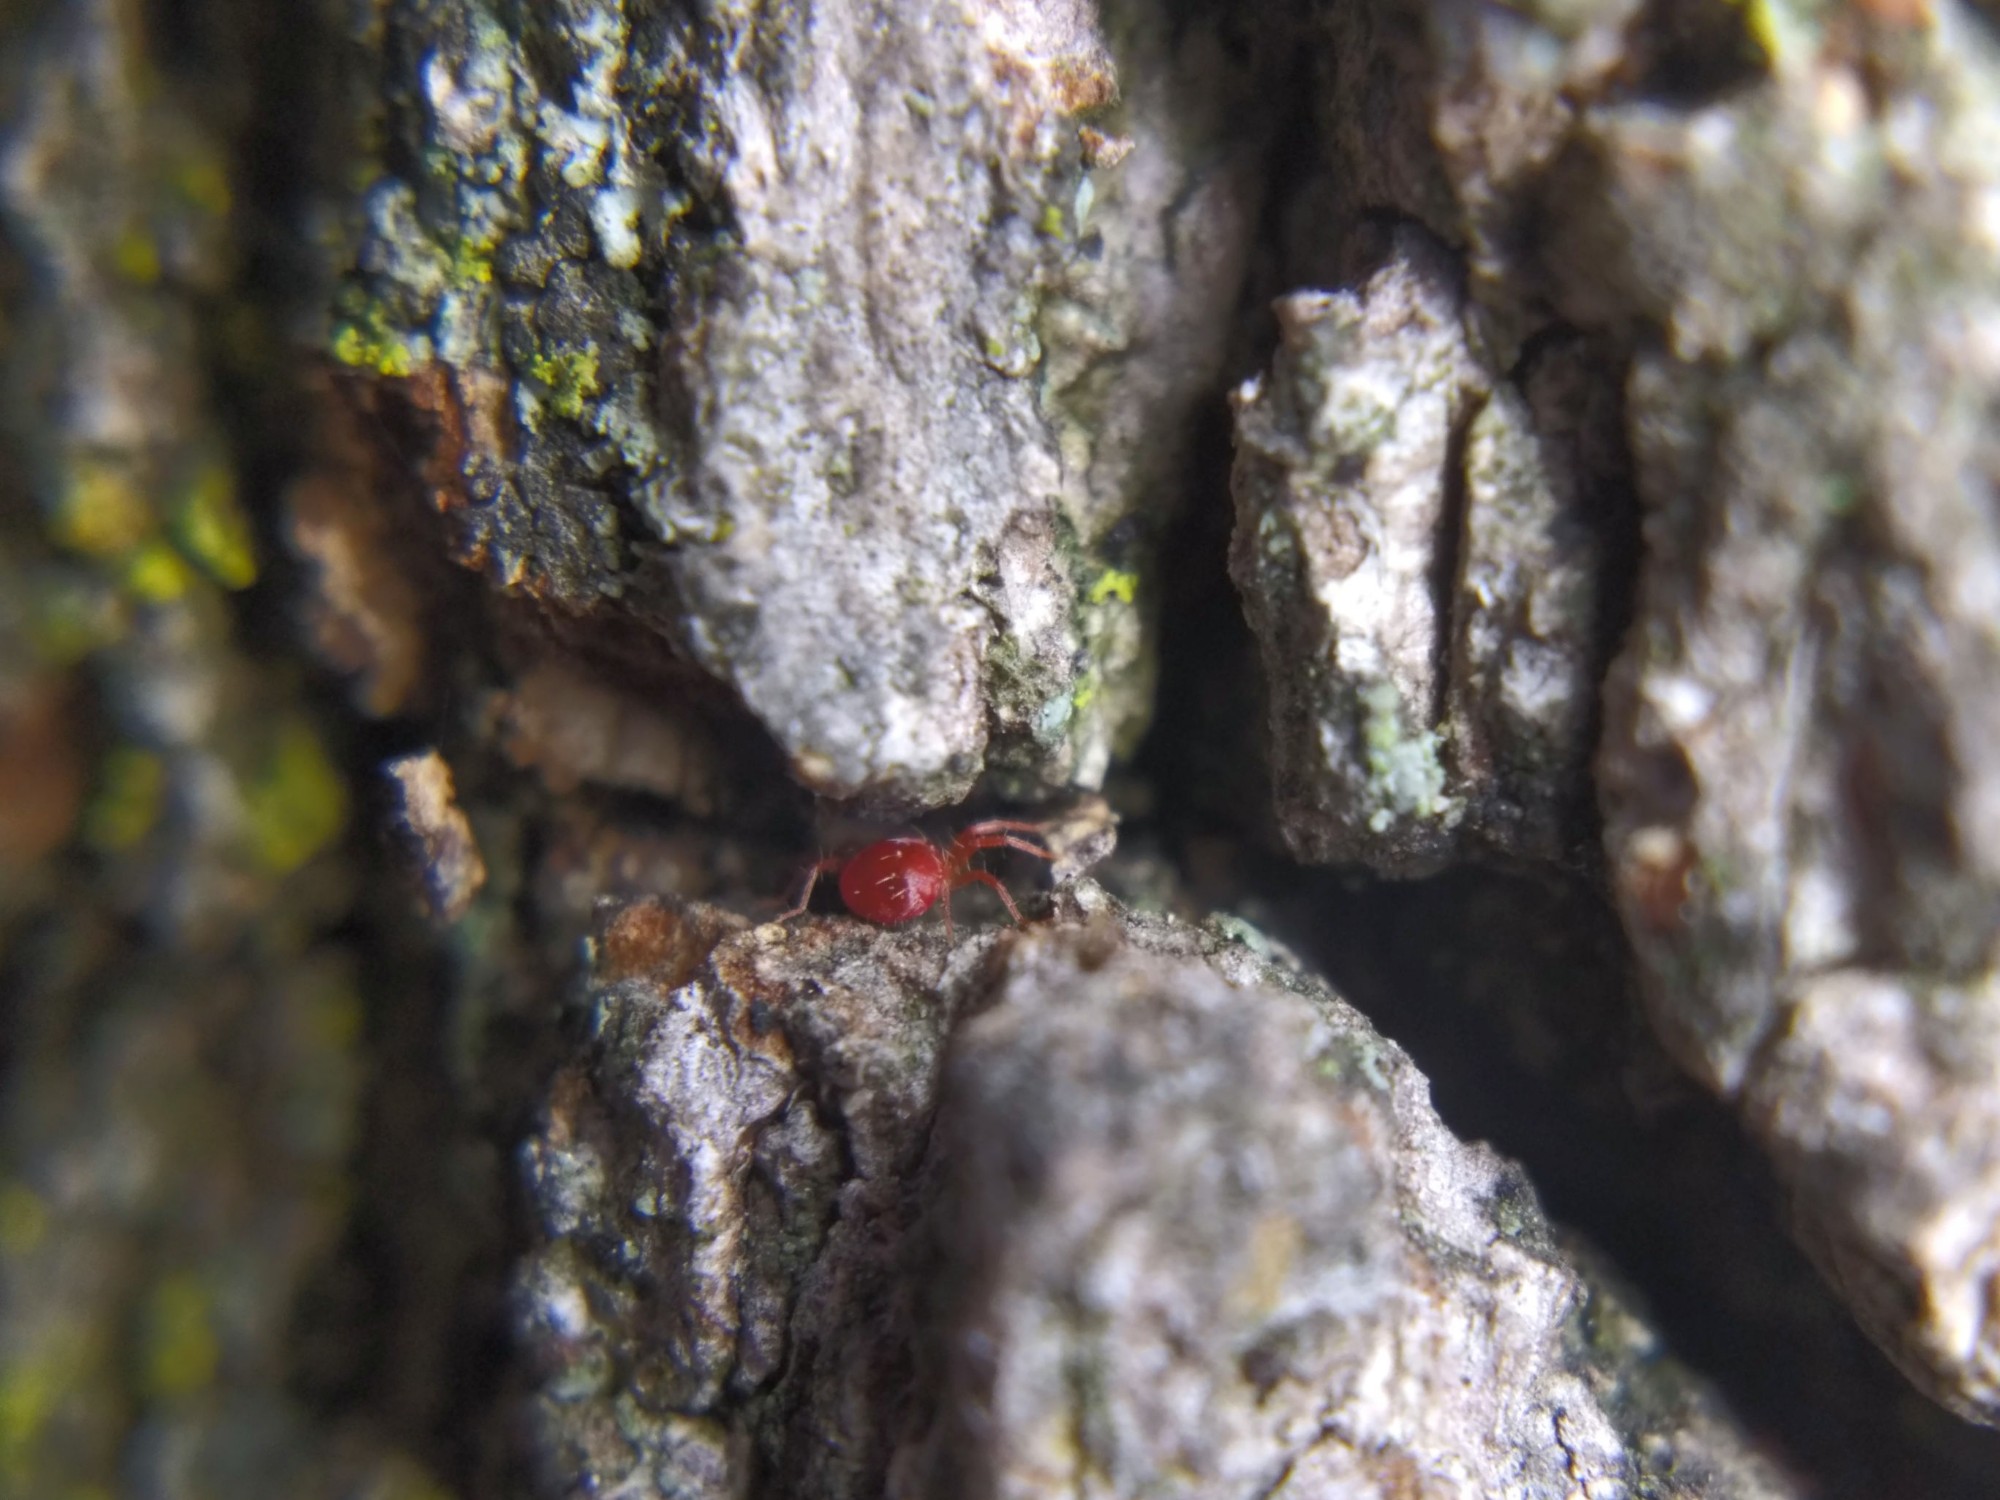 A red whirligig mite (family Anystidae) hiding in a crack in tree bark.